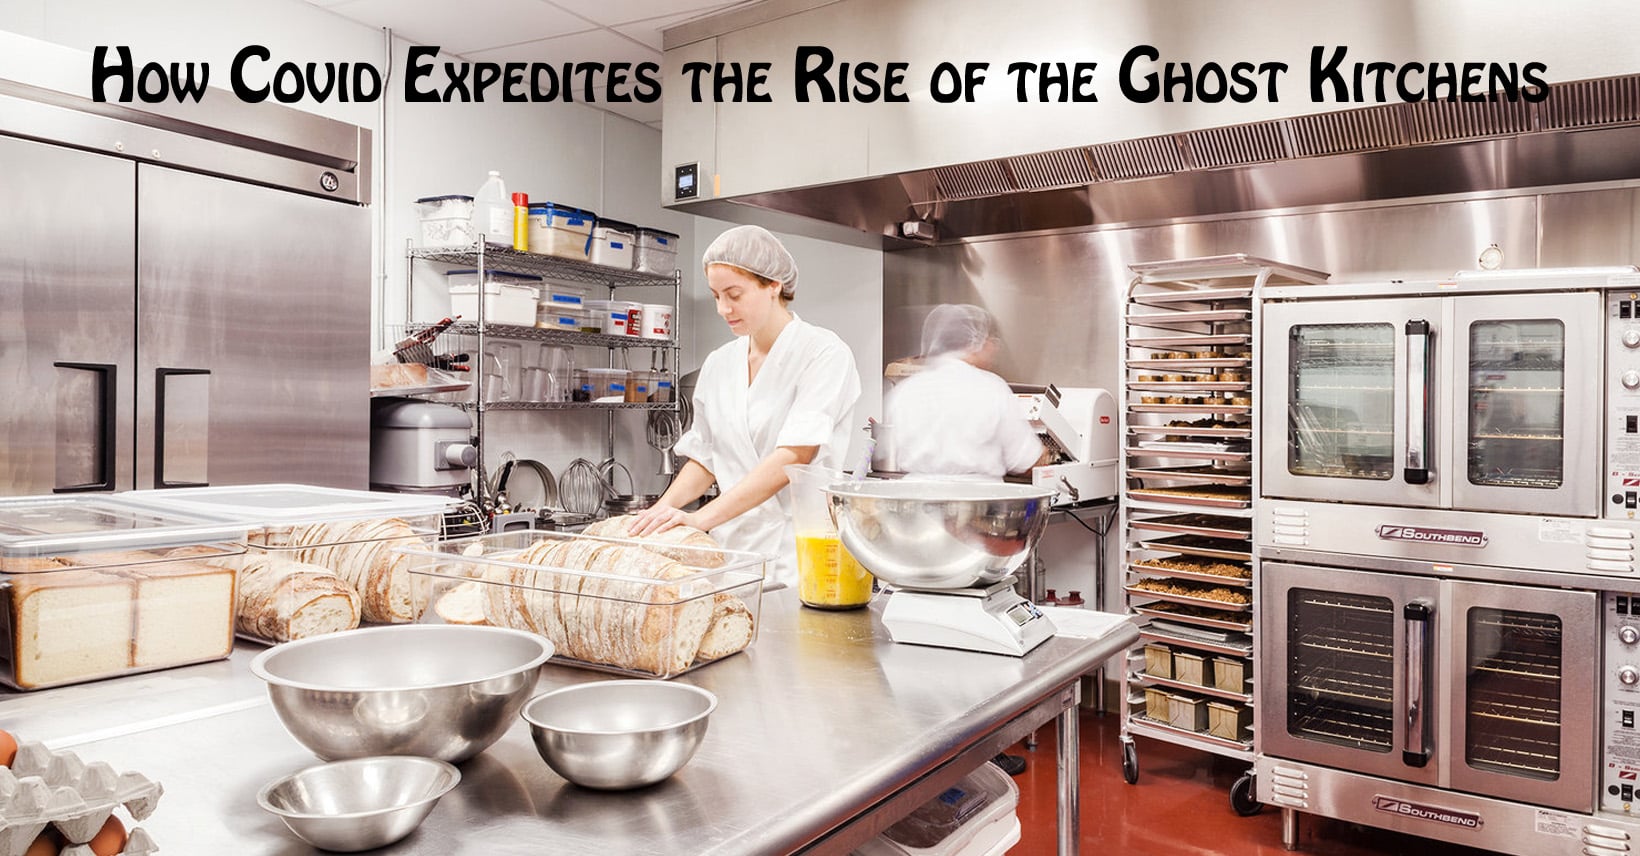 How Covid Expedites the Rise of the Ghost Kitchens